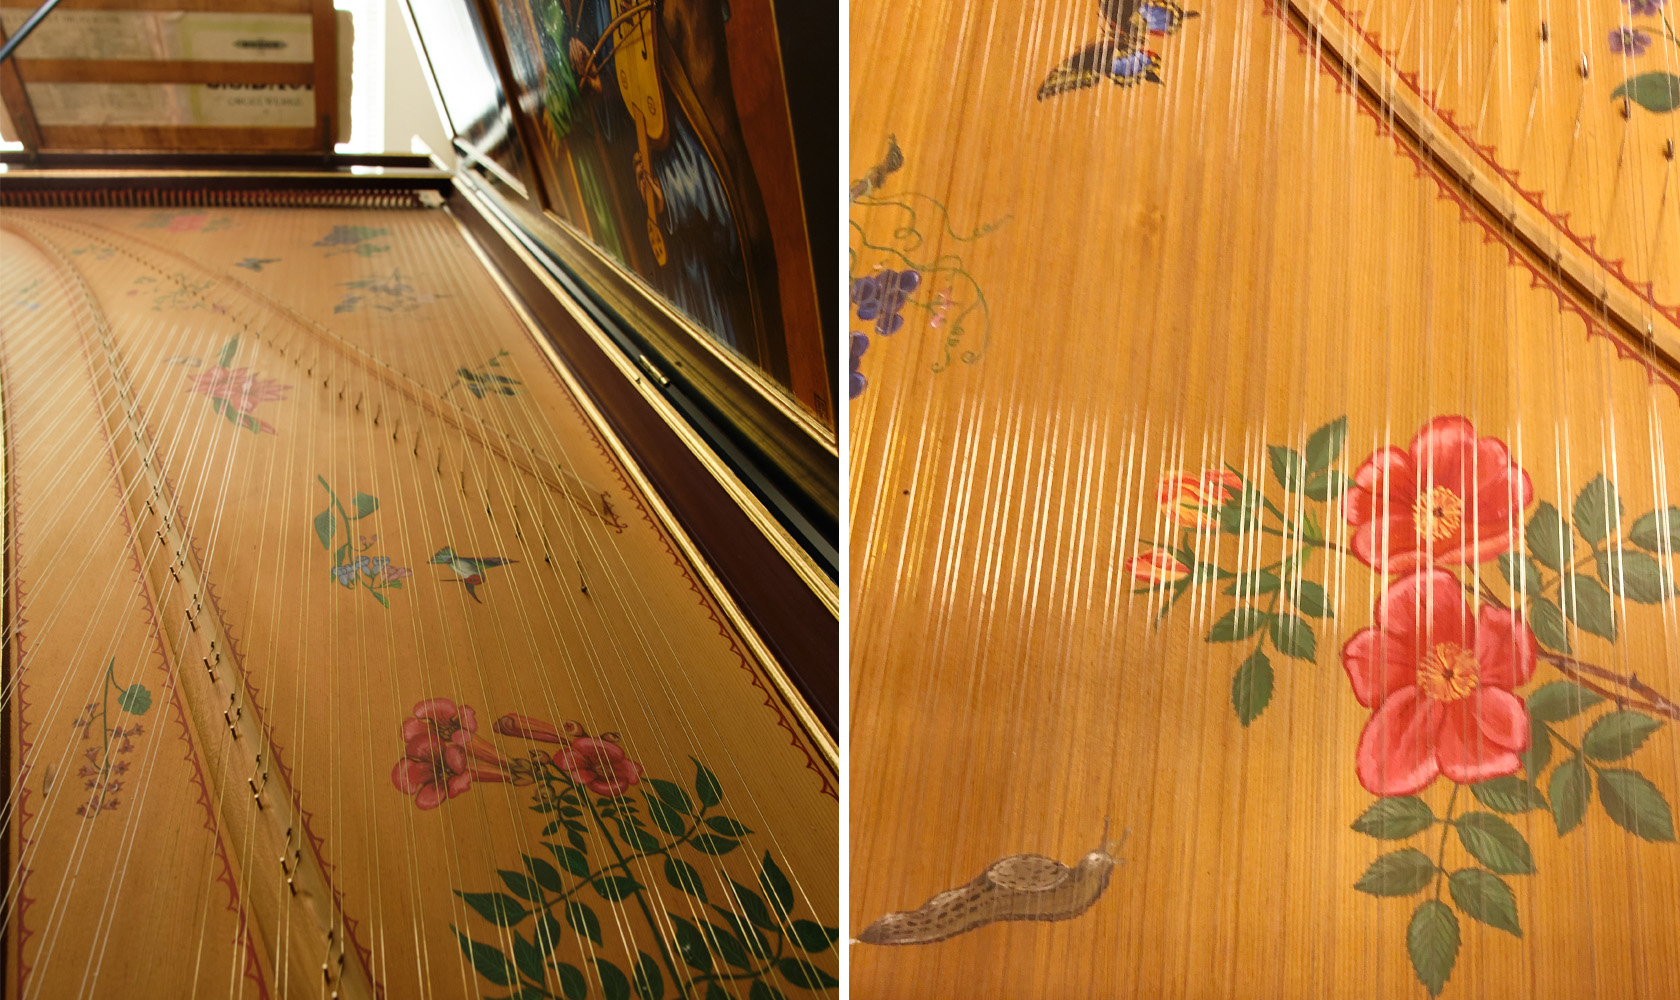 Detail shot of the harpsichord sound board with nature motifs painted on it.